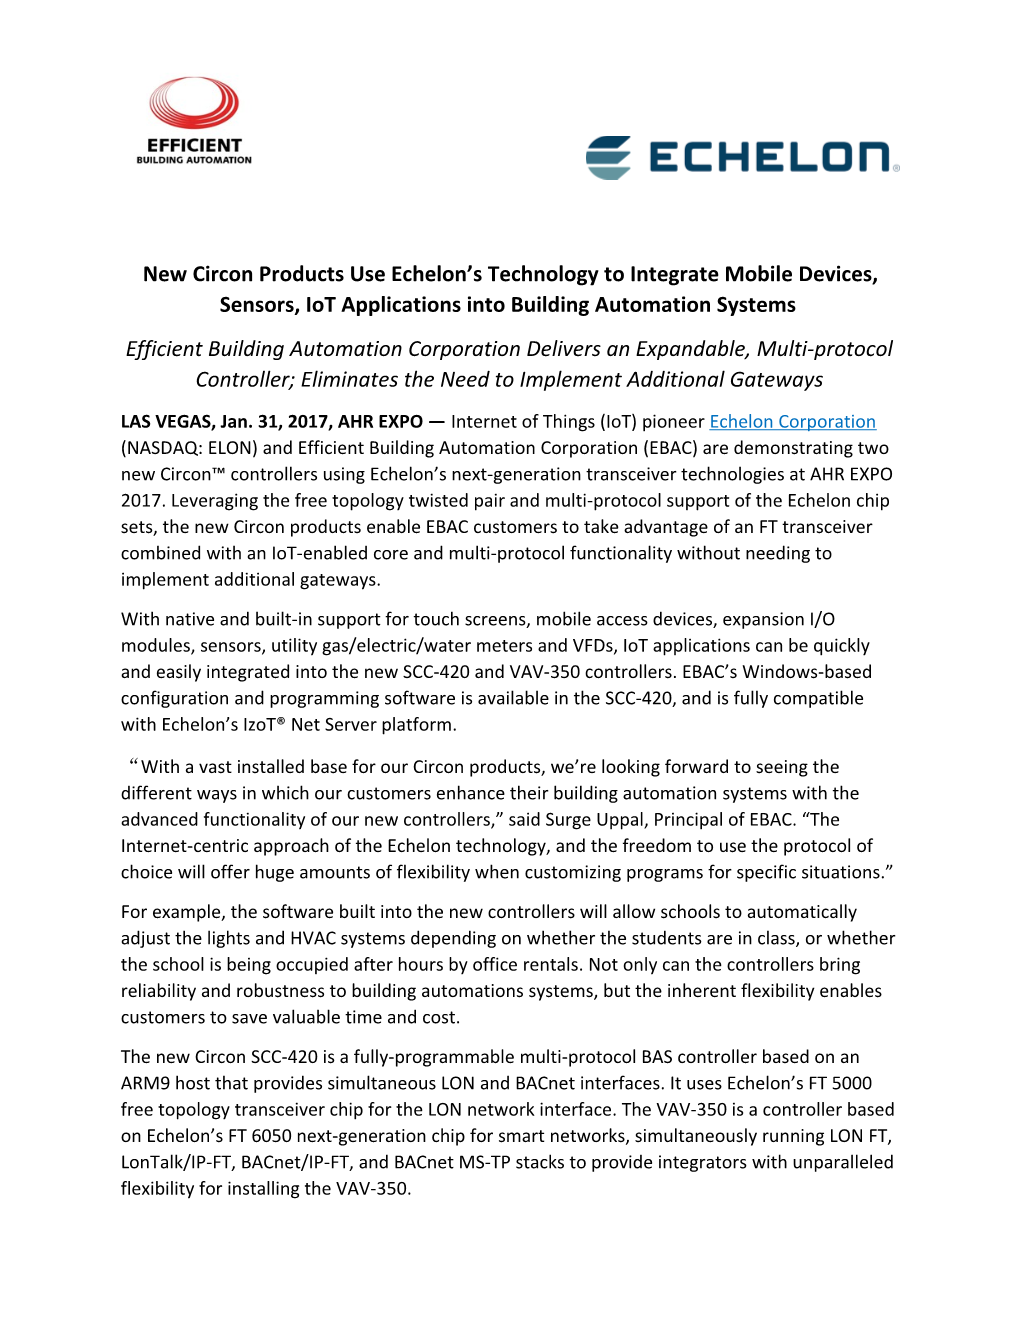 New Circon Products Use Echelon S Technology to Integrate Mobile Devices, Sensors, Iot